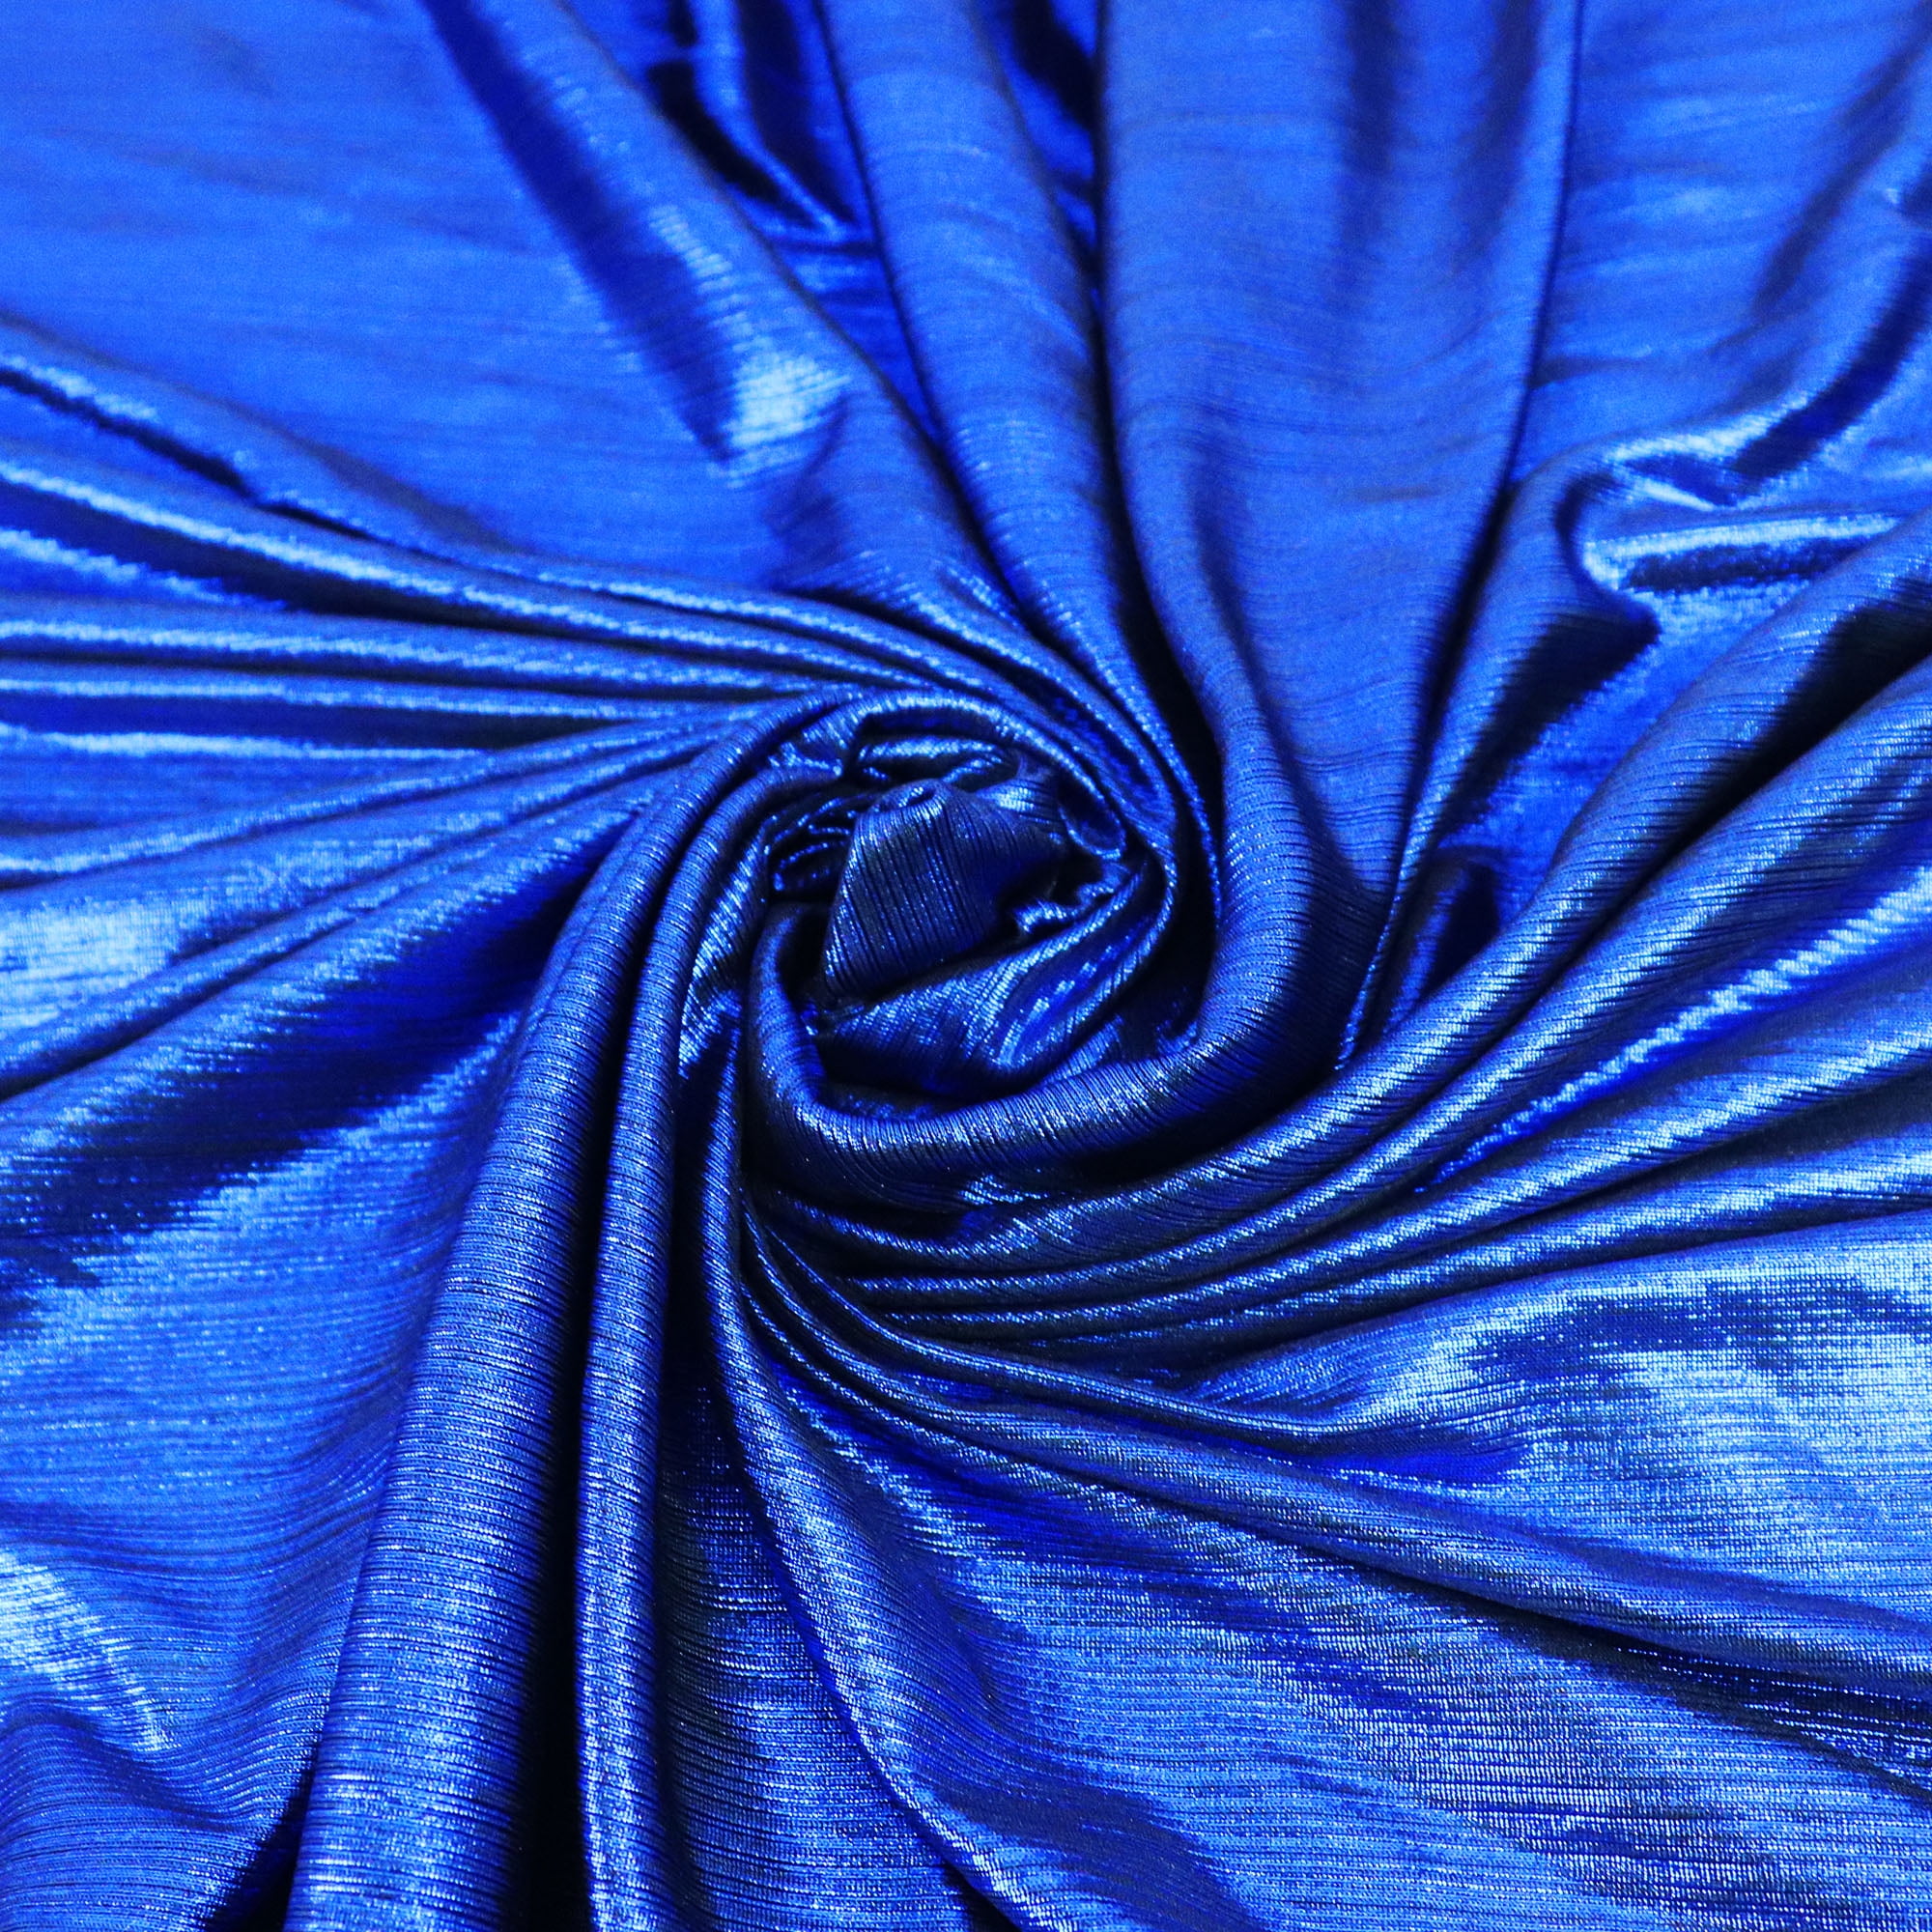 Romex Textiles Polyester Spandex Knit Fabric with Laminated Shine (3 Yards)  - Royal Blue 